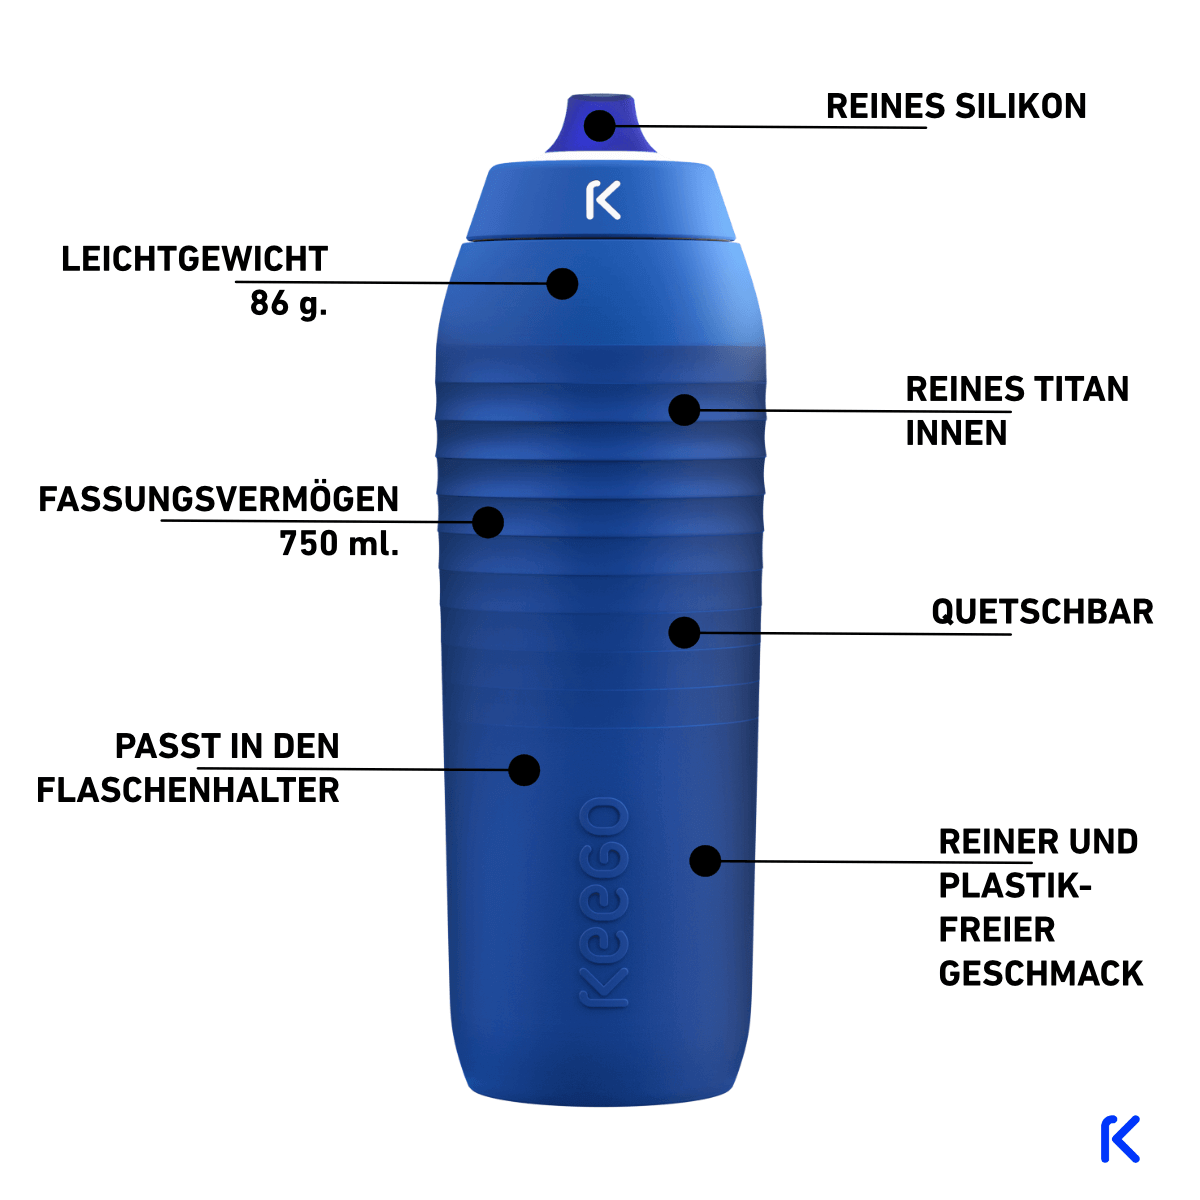 Blue Keego drinking bottle 0.75l with references to product details